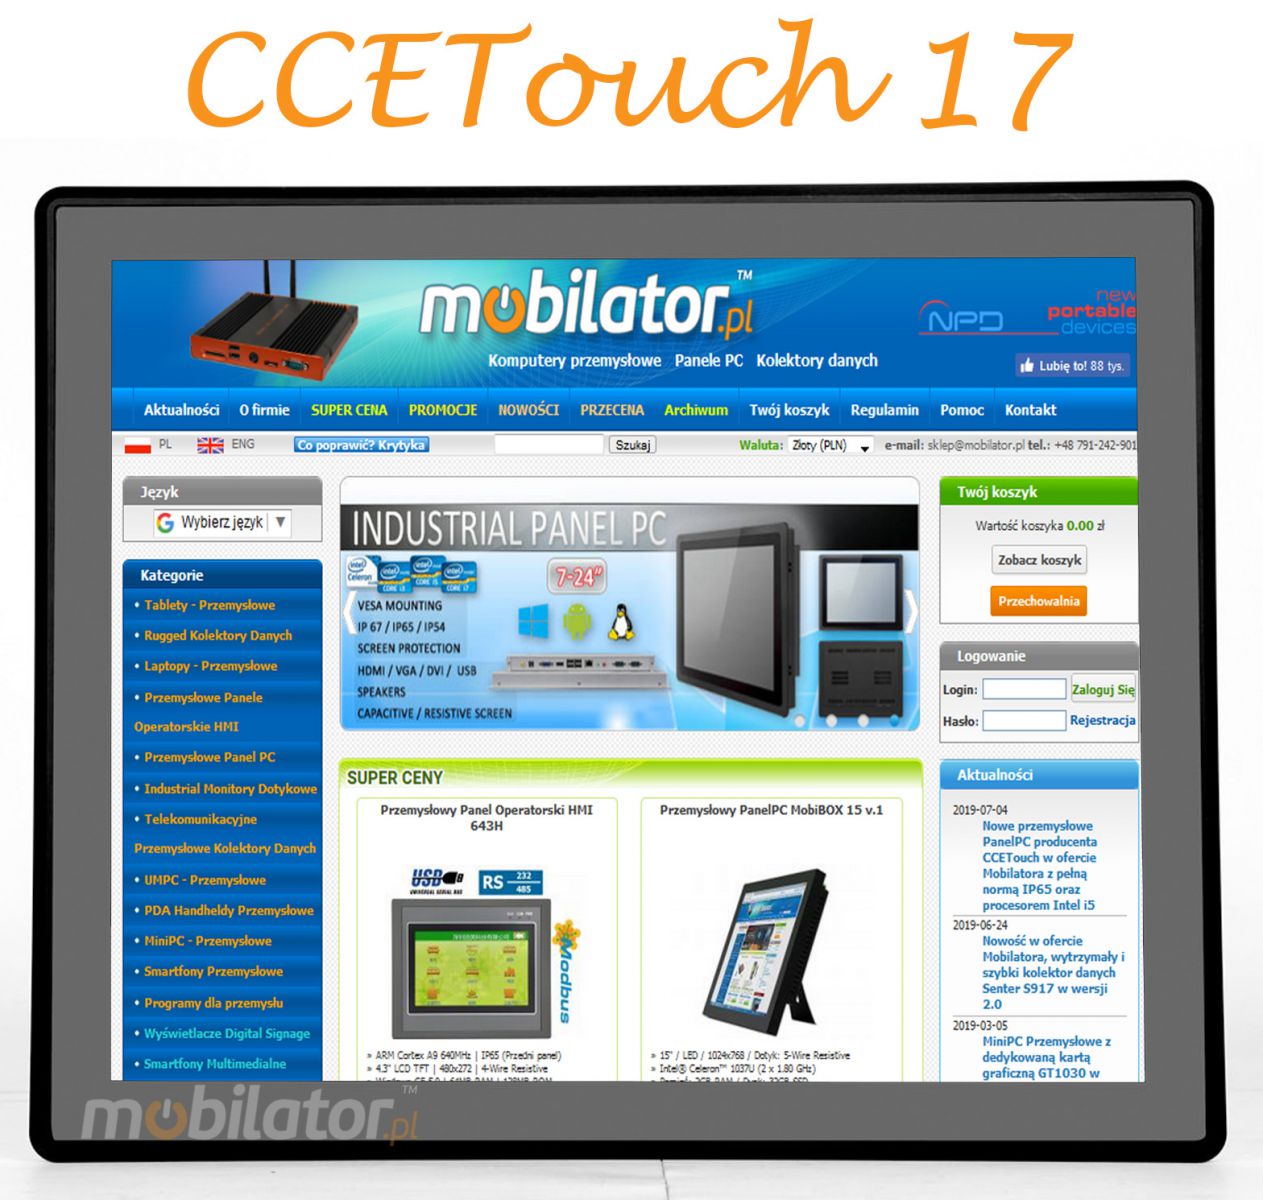 CCE Touch CTPC170RD3 Mobilator Flat Design PCAP Fanless Touch PC, LED panel, built-in WIFI, 12V DC input